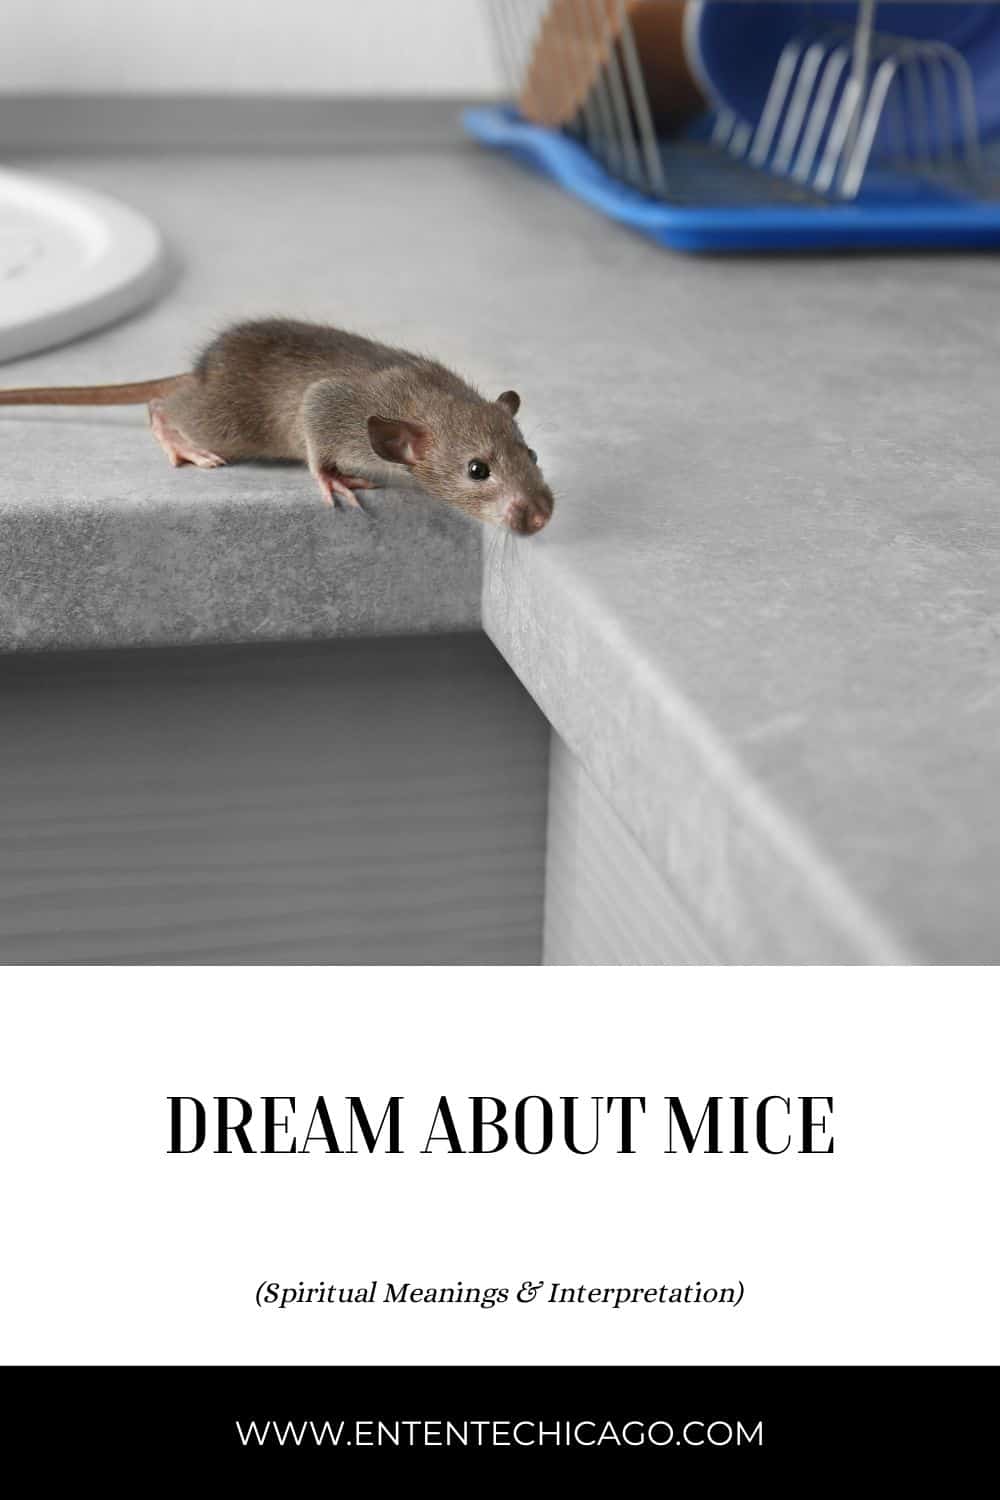 Meanings of Dreaming About Mice